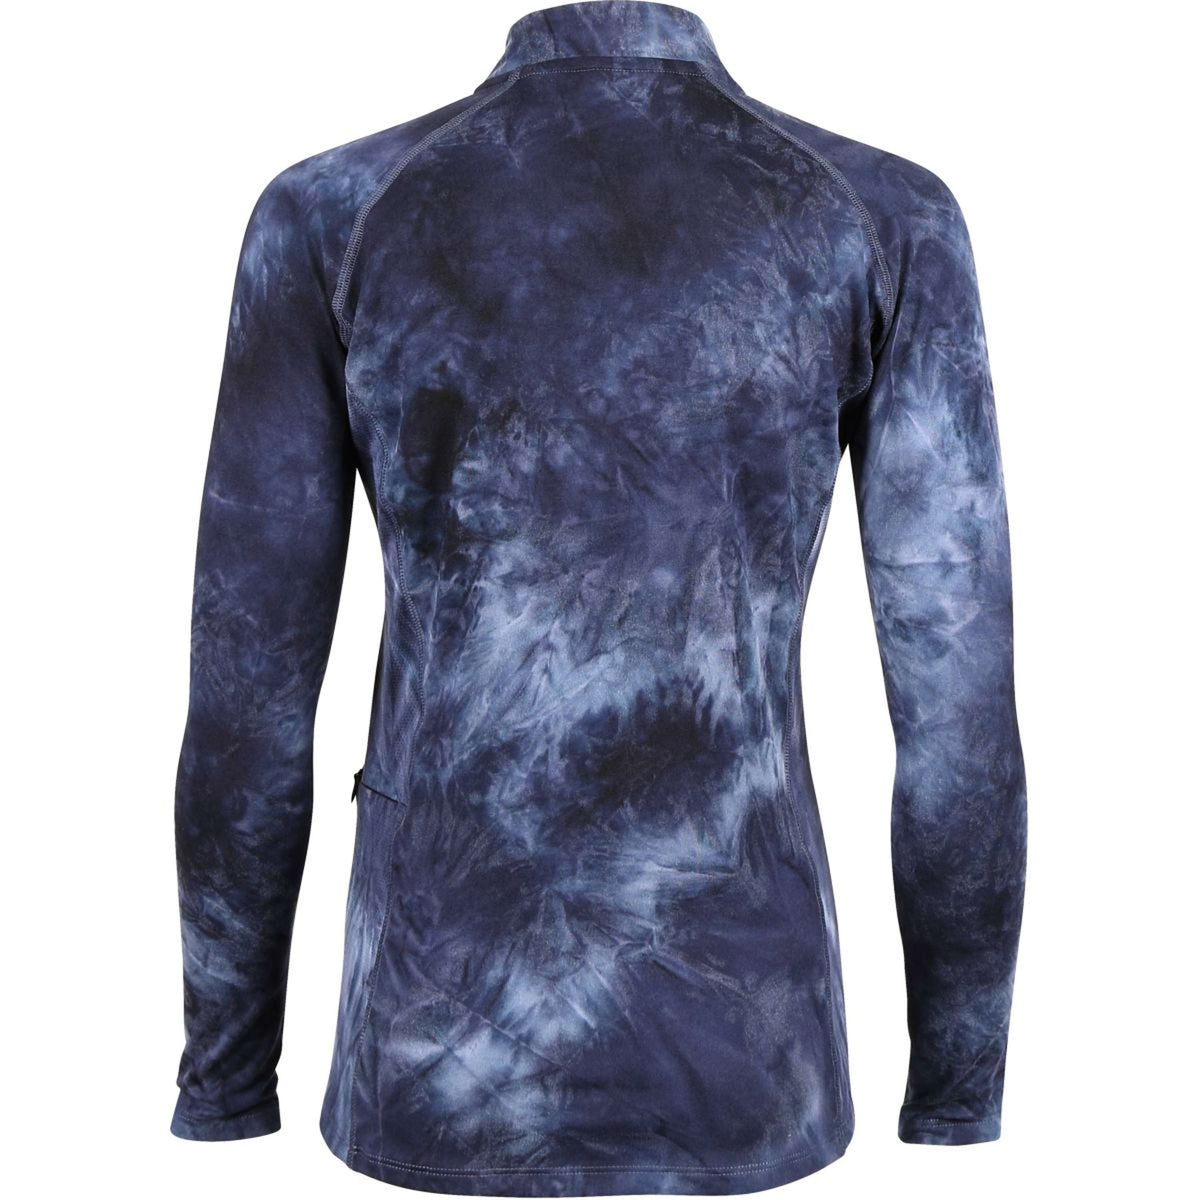 Aubrion Base Layer Revive Young Rider Navy Tie Dye